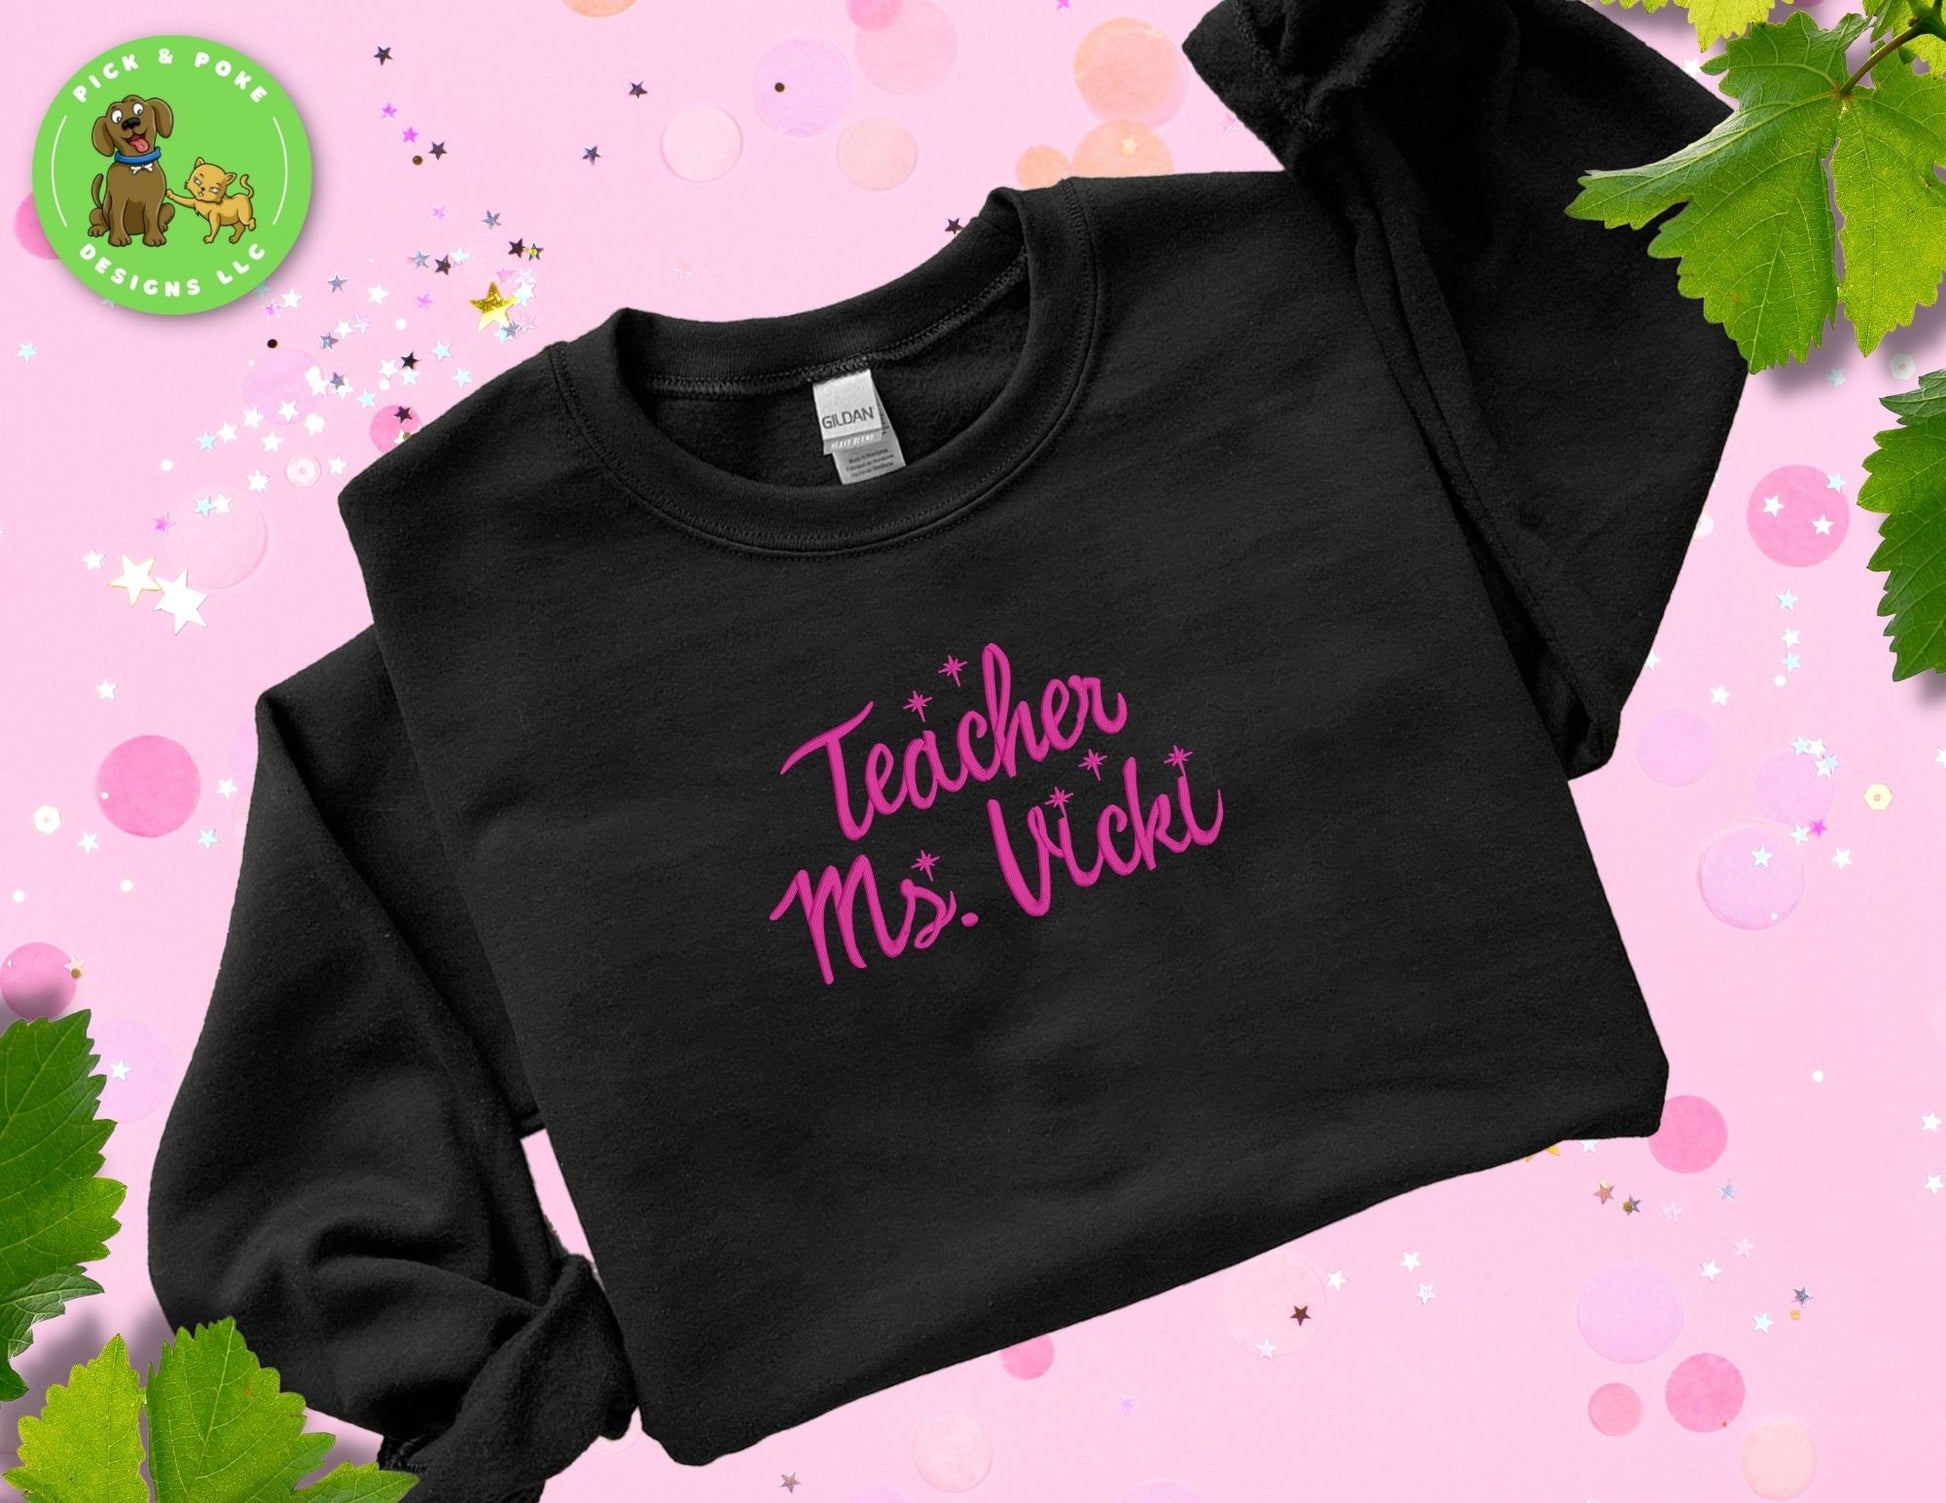 Embroidered Teacher Sparkle Sweatshirt Personalized with Your Name in a thread color of your choice.